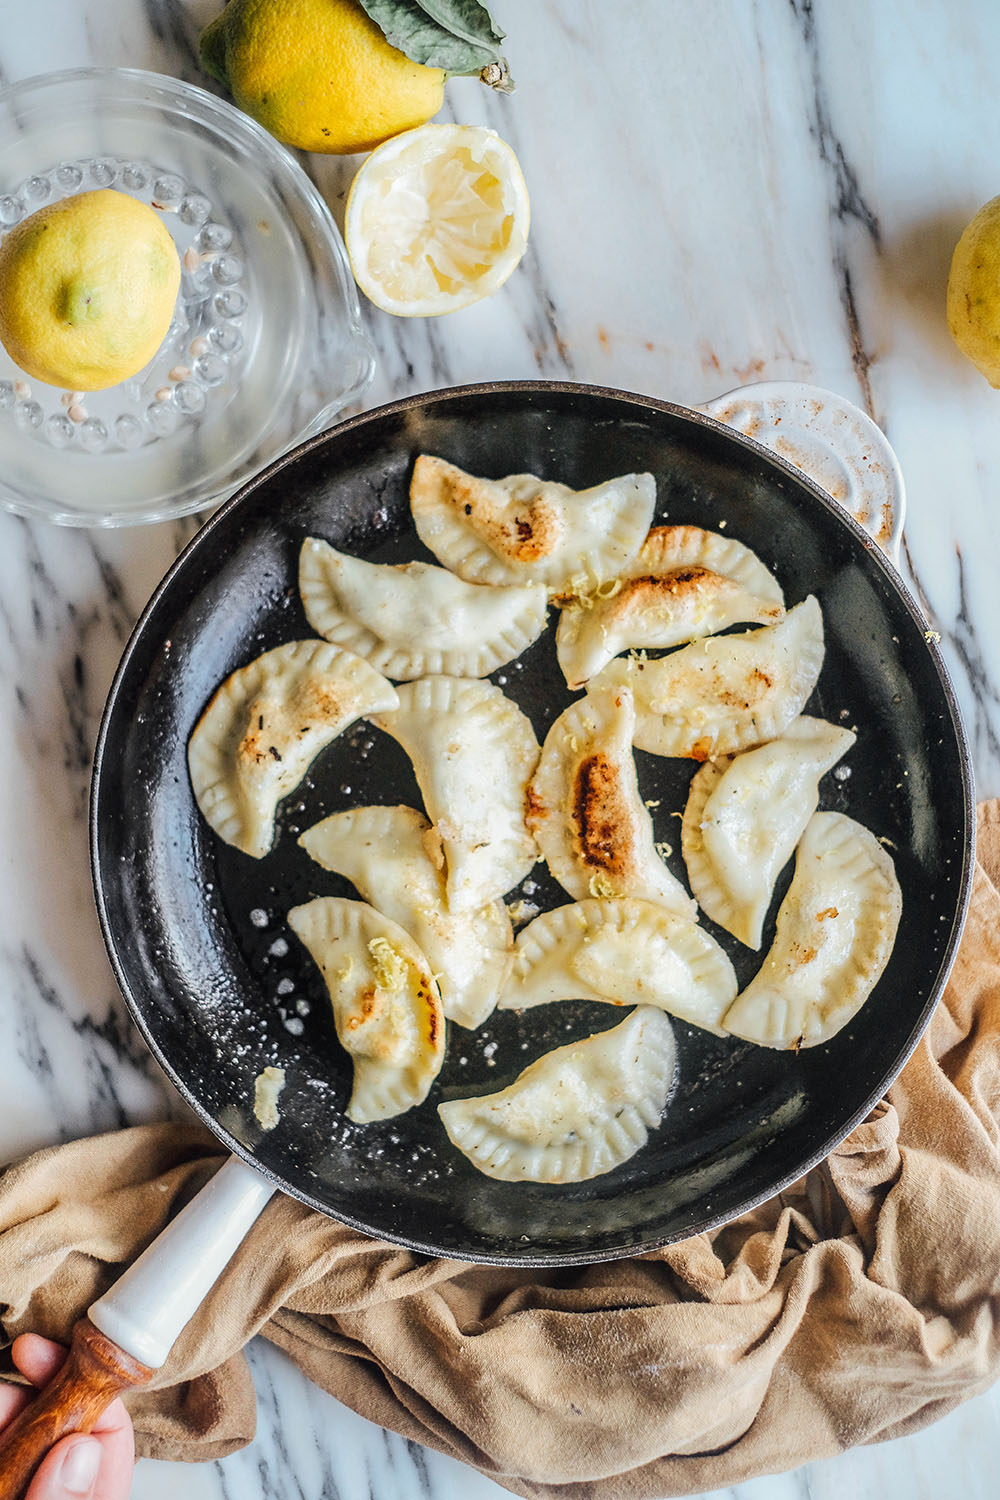 gluten-free ravioli with feta-rosemary filling and beetroot